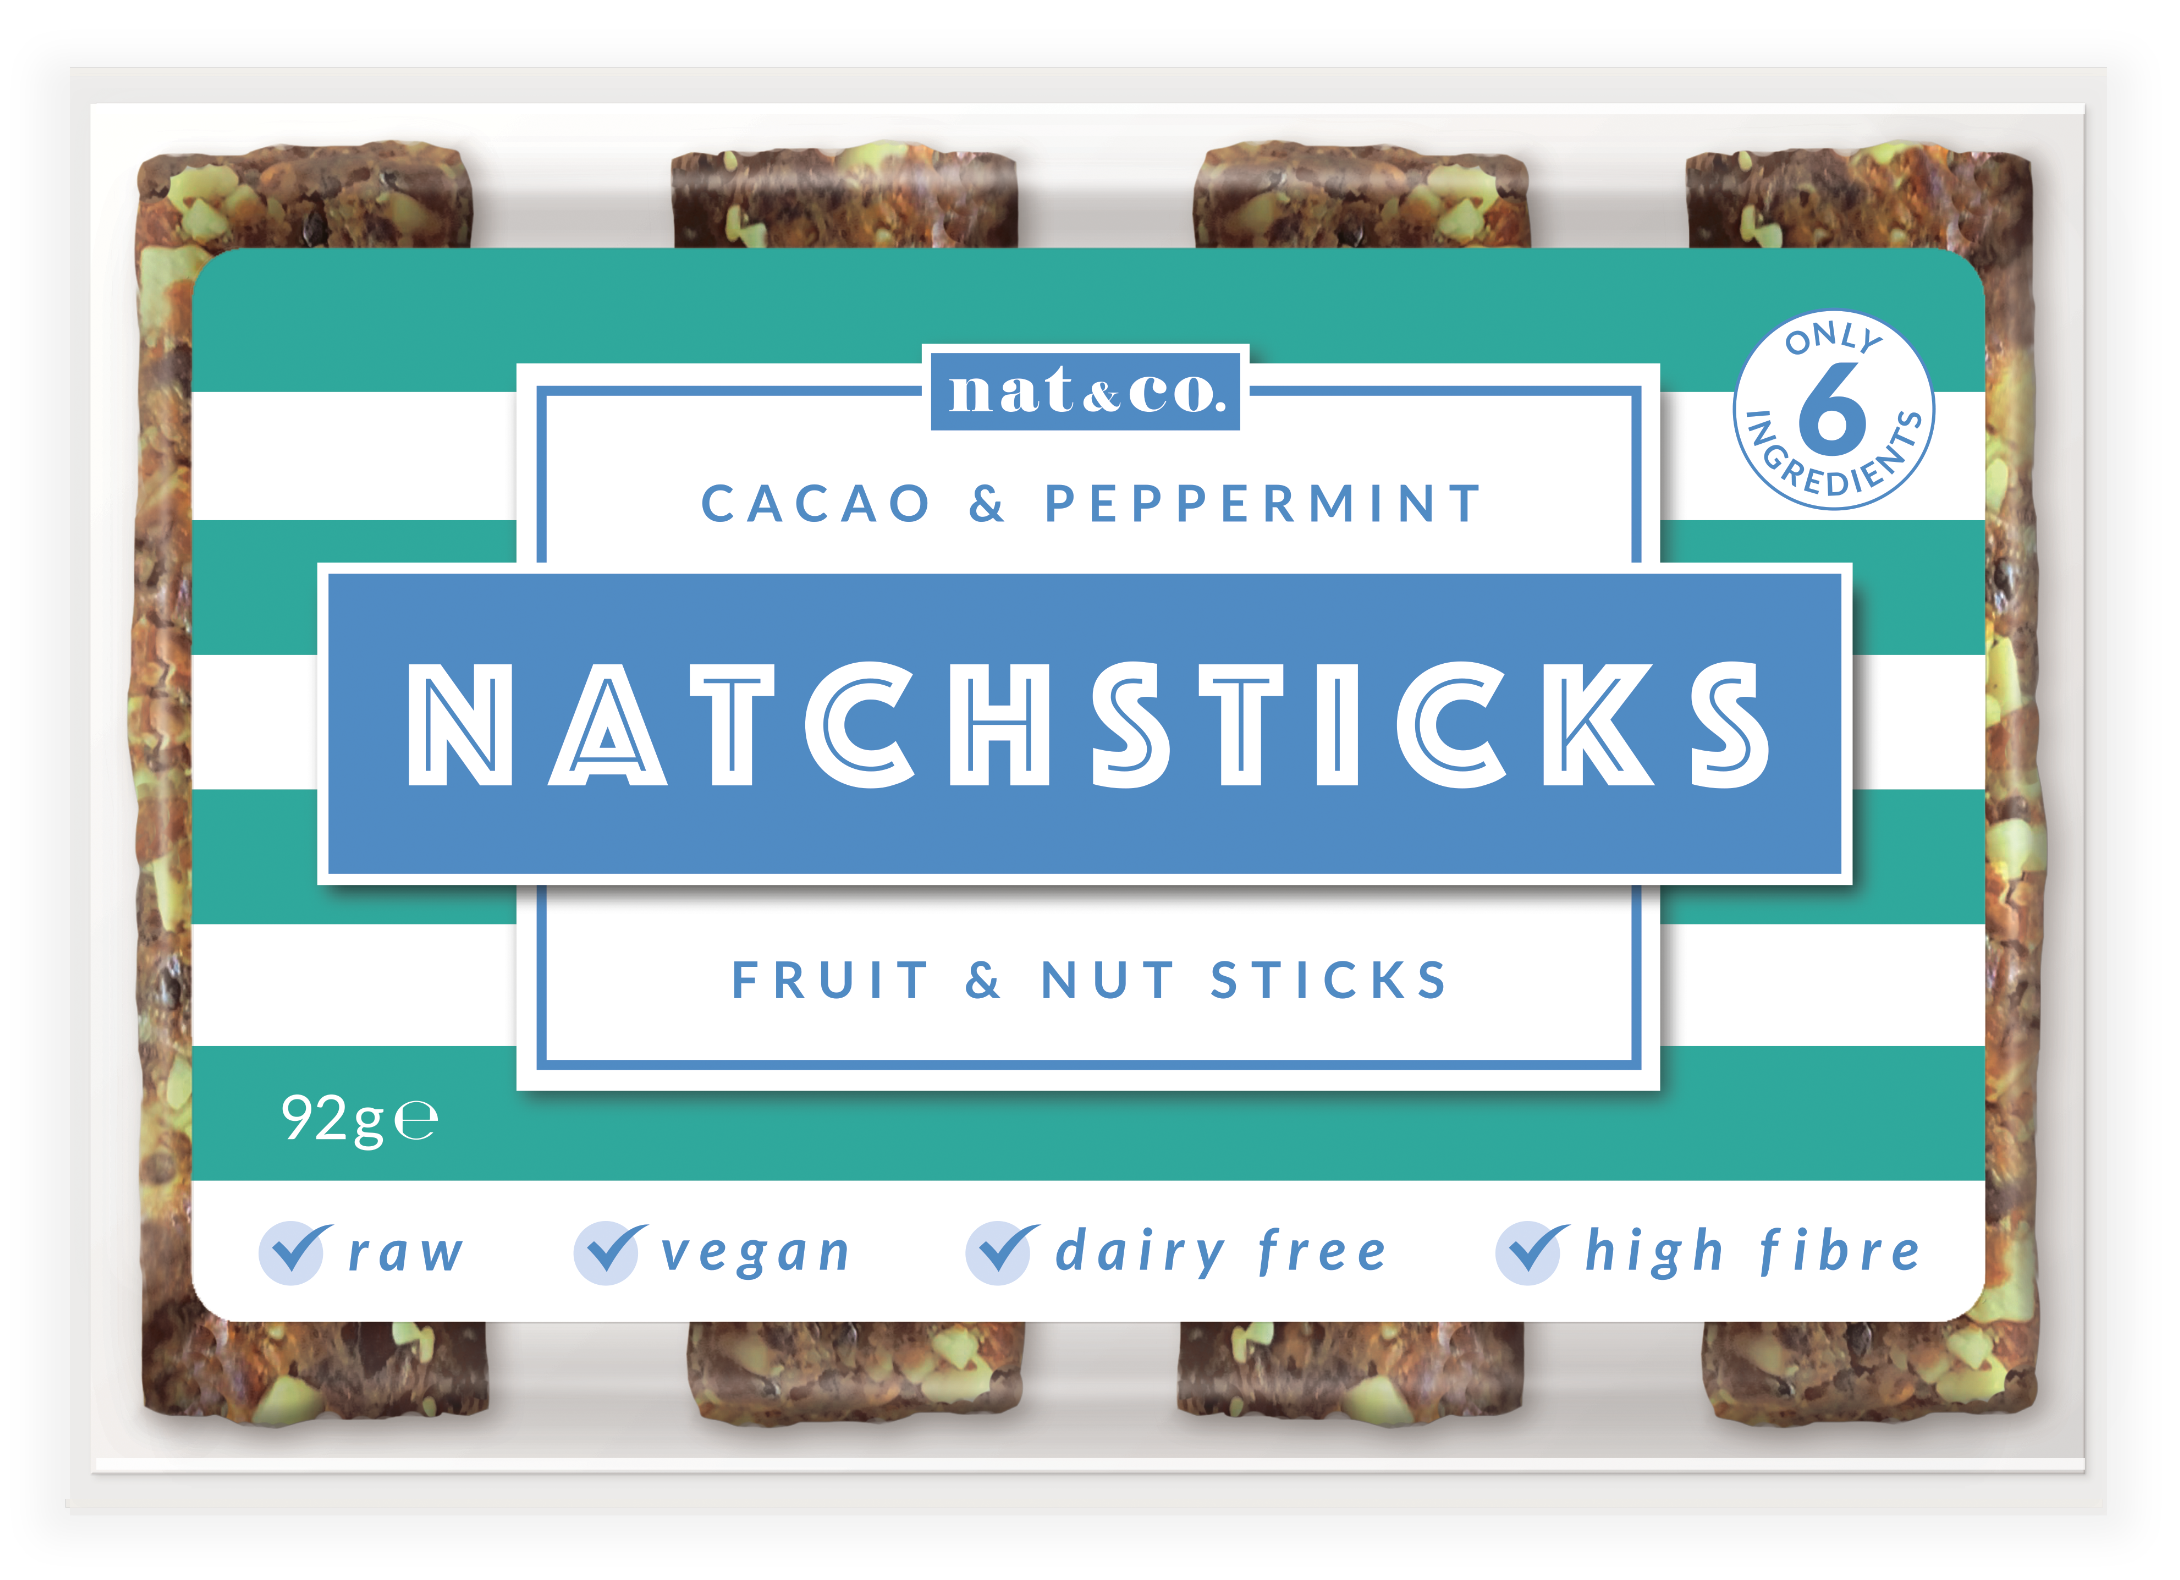 Natchsticks_Cacao_Peppermint.png